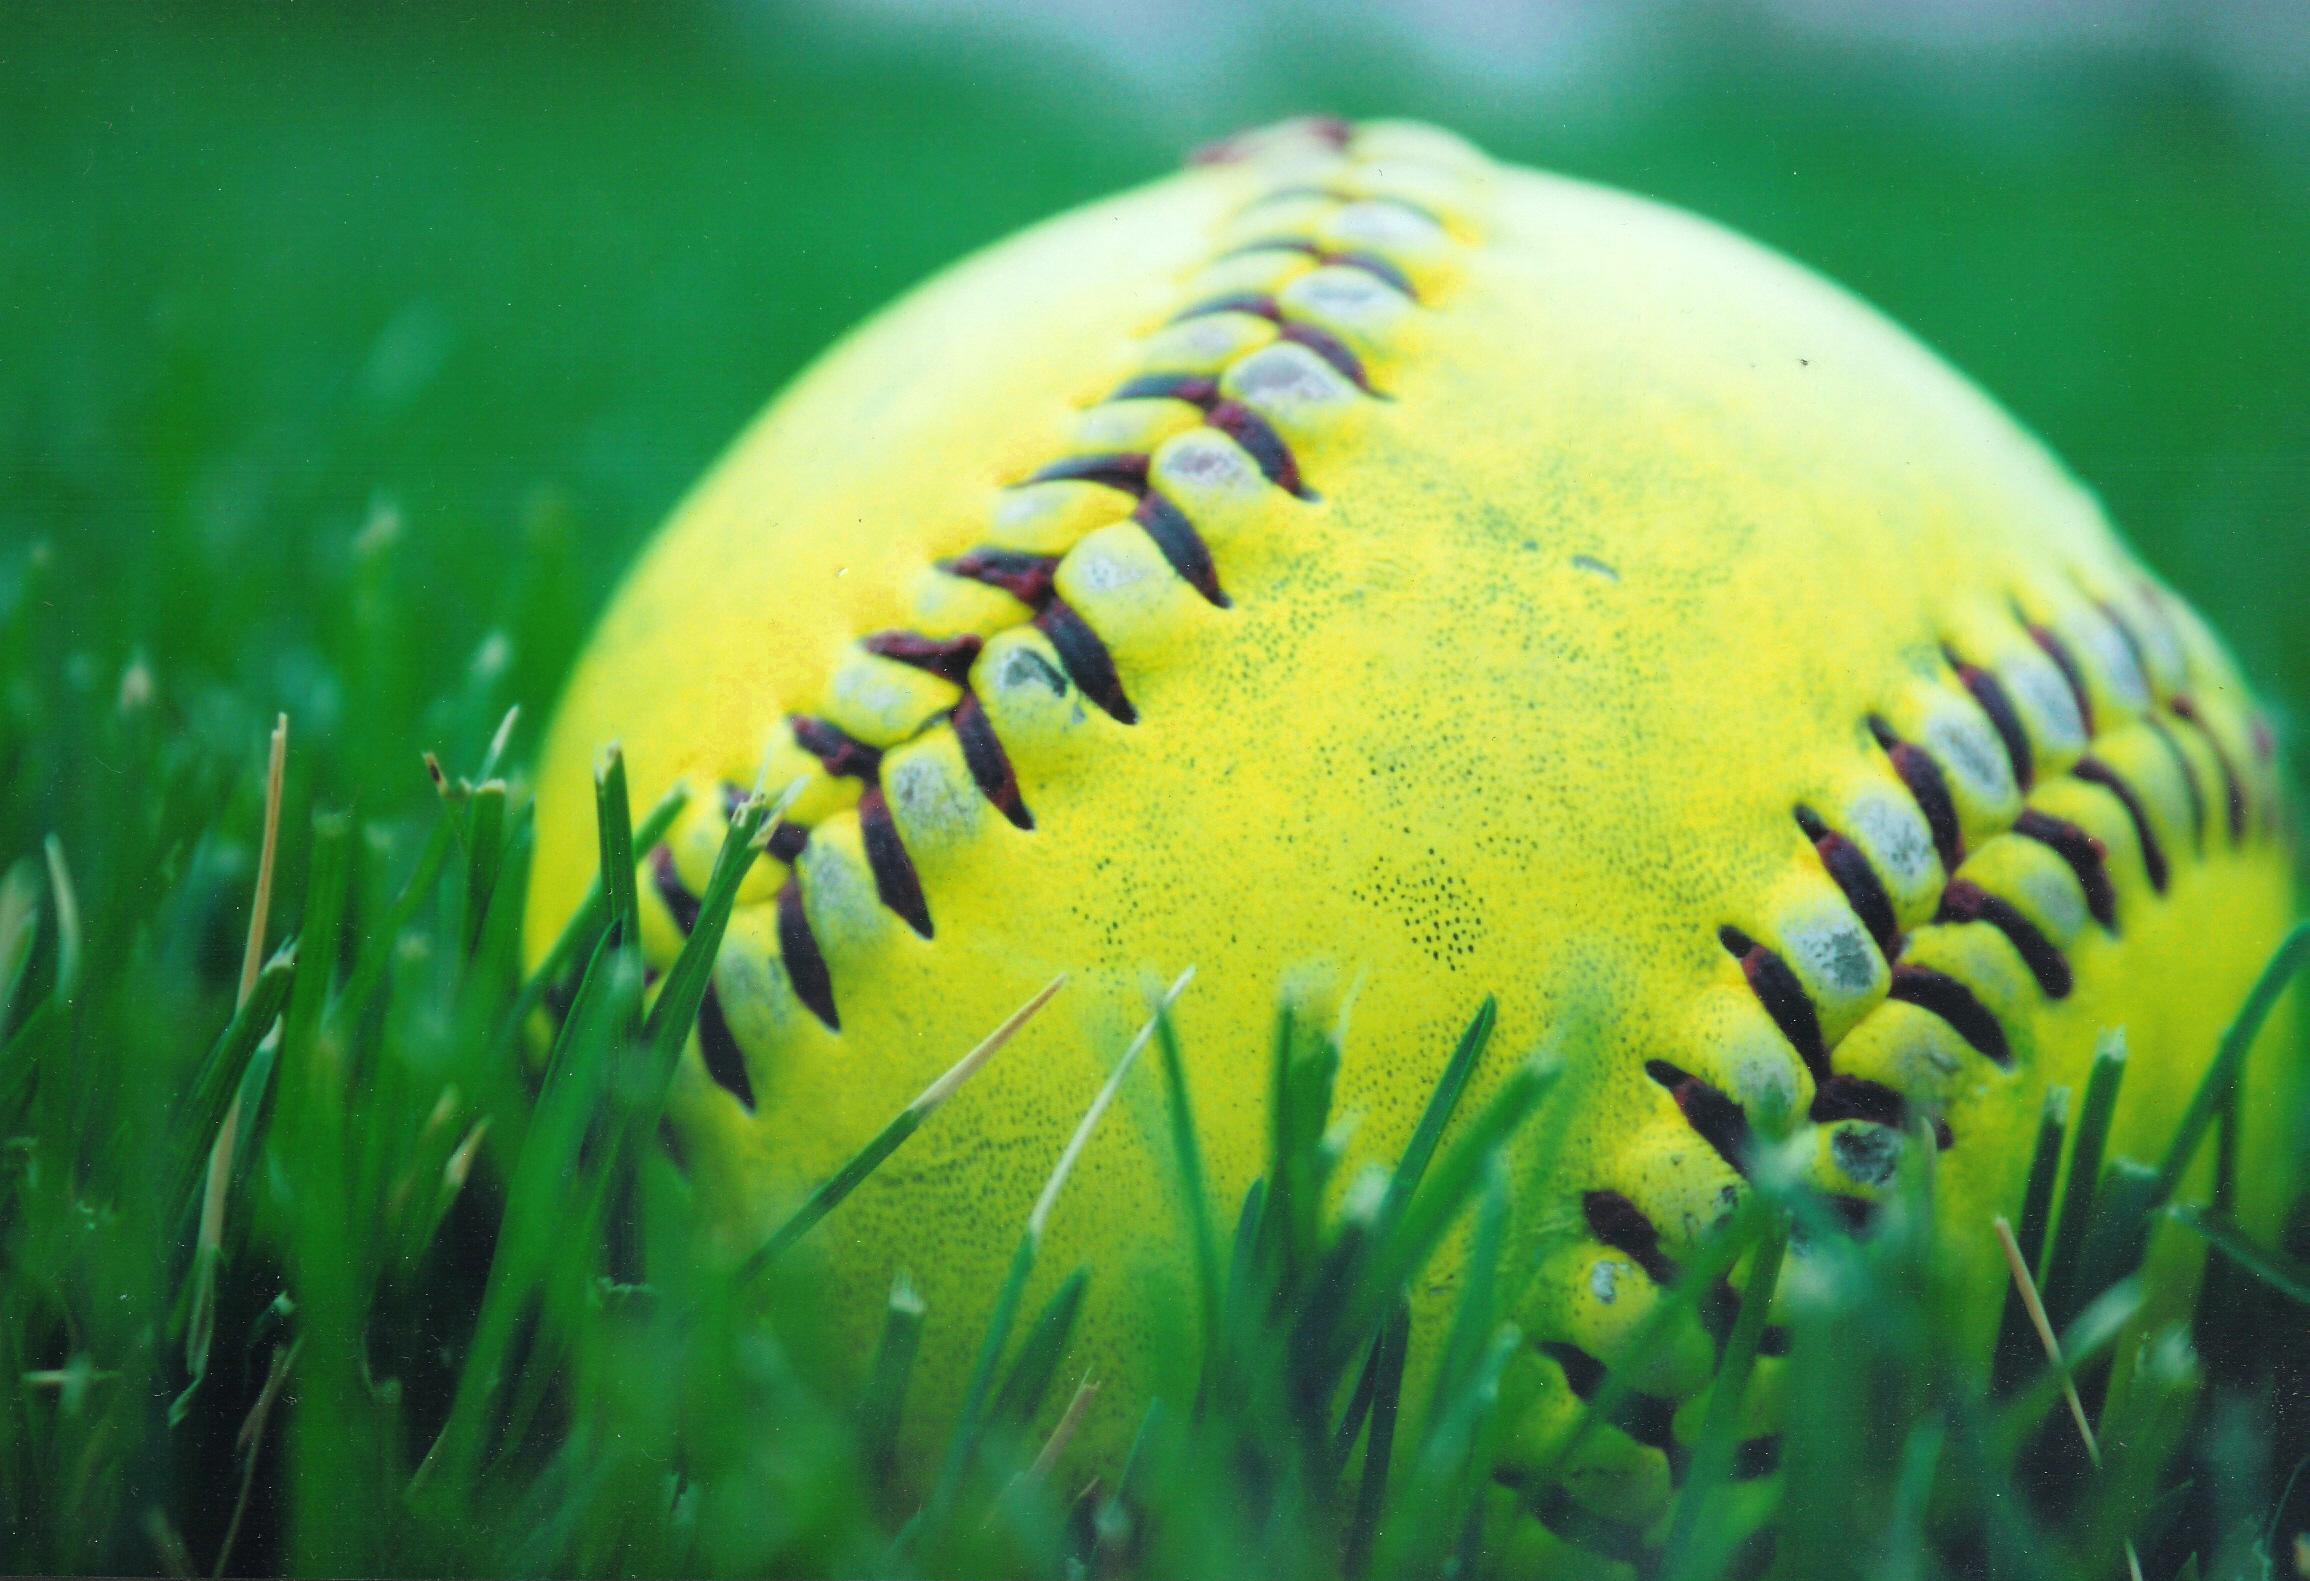 Softball Wallpapers 47 images inside